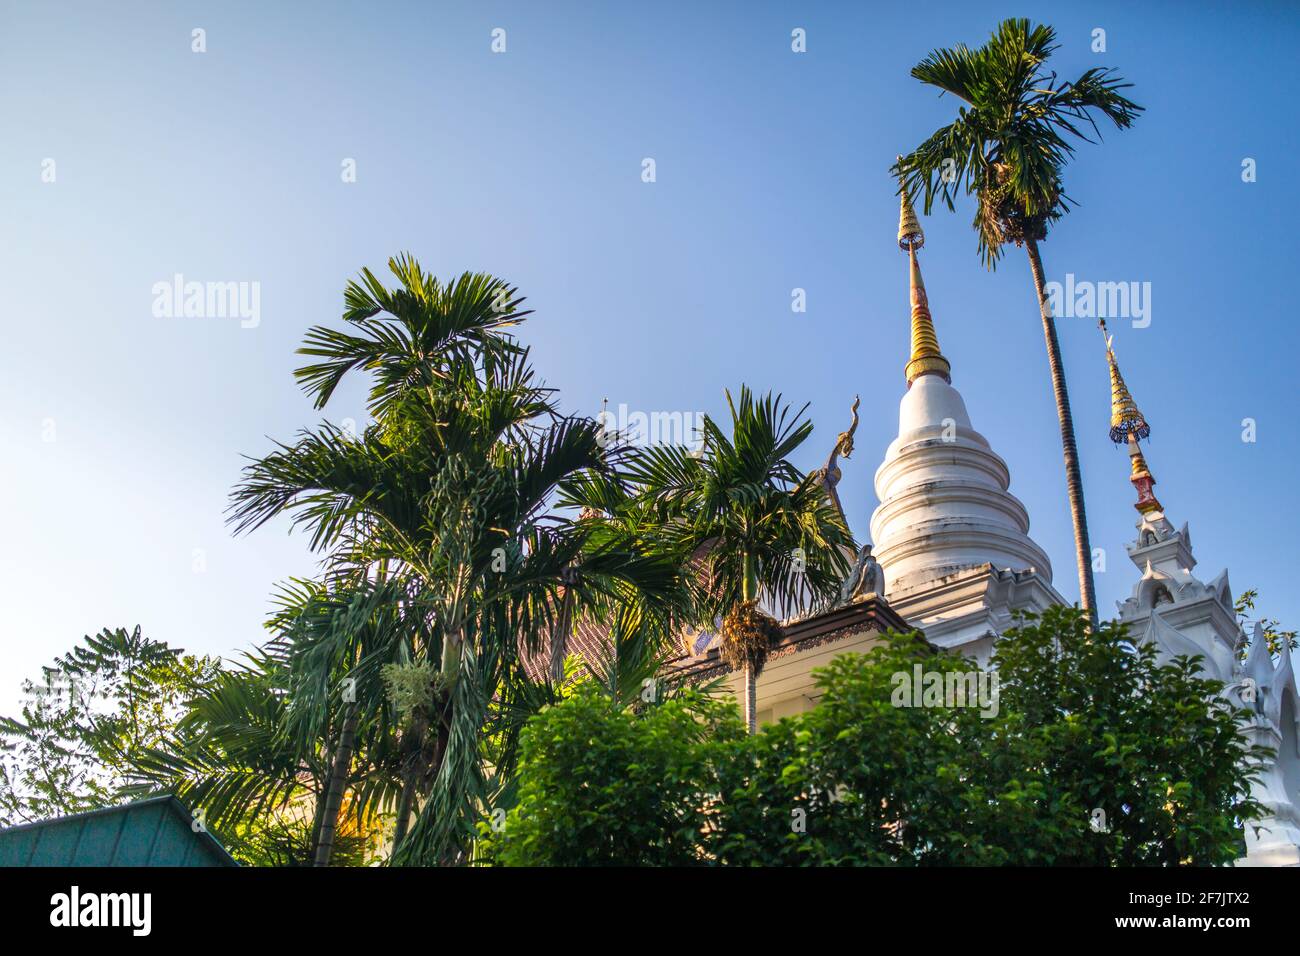 Temple in Chiang Mai, Thailand. Stock Photo